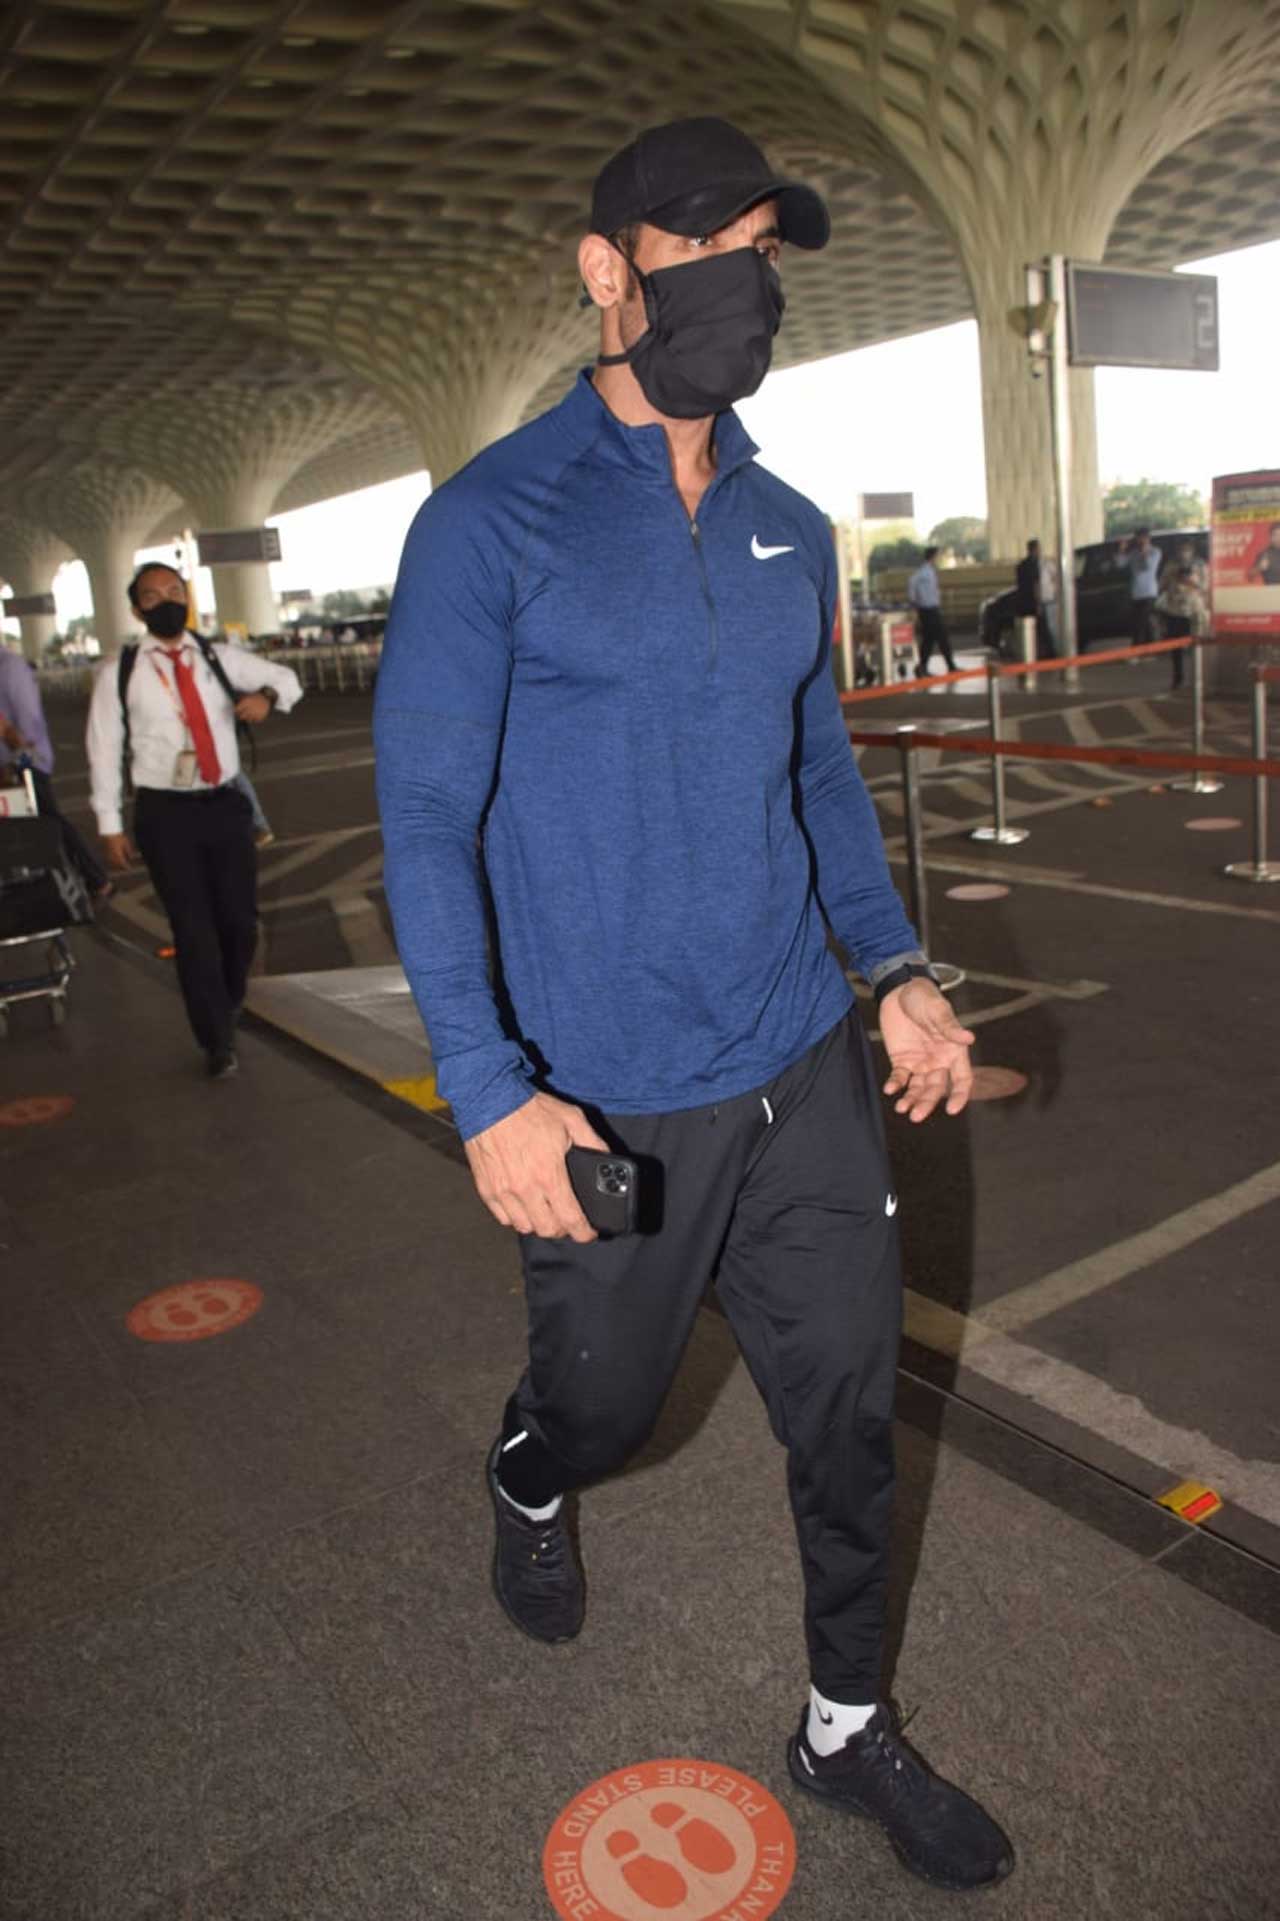 Satyameva Jayate 2 actor John Abraham was also snapped at the Mumbai airport. Speaking about his upcoming drama opposite Divya Khosla Kumar, was slated for an October 2020 release. Earlier, Milap Zaveri's directorial venture was said to be a box-office clash with three other major films- Vicky Kaushal's Sardar Udham Singh, Farhan Akhtar's Toofan, and hopefully, Tiger Shroff's Rambo Remake. Now, the film is slated for a May 2021 release.